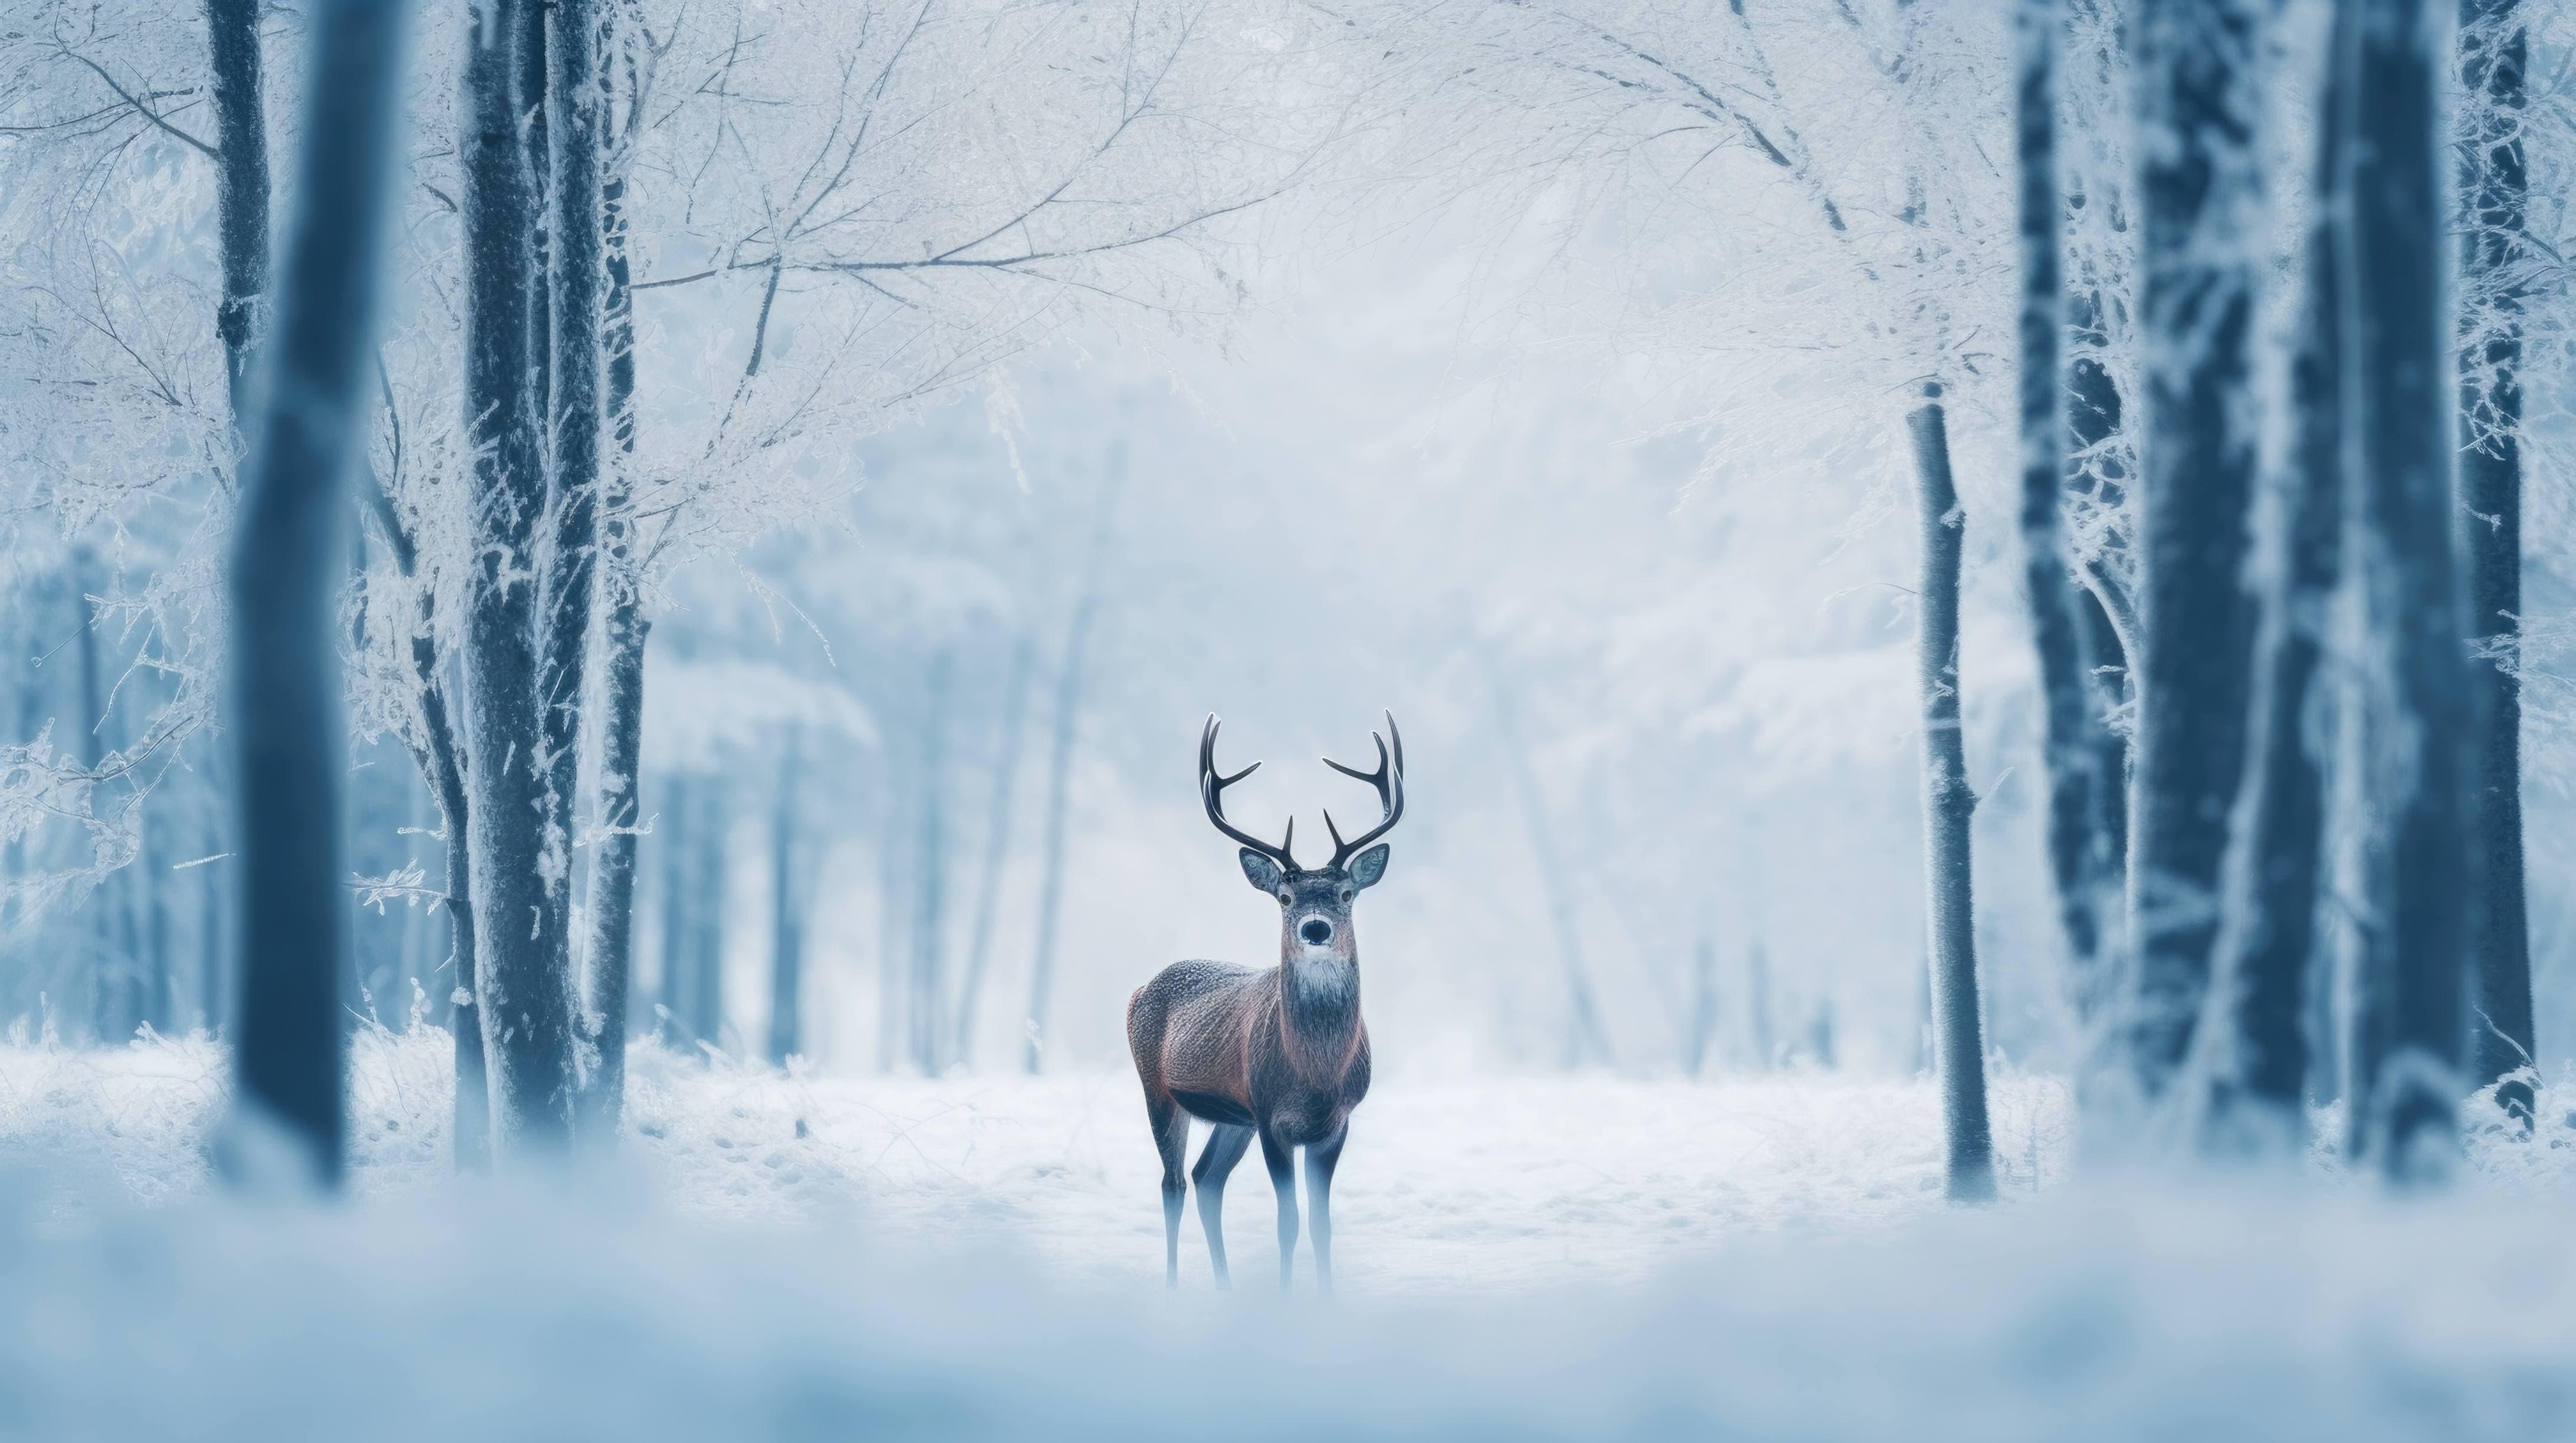 A Snowy Winter Landscape With The Silhouette Of Deer Captures